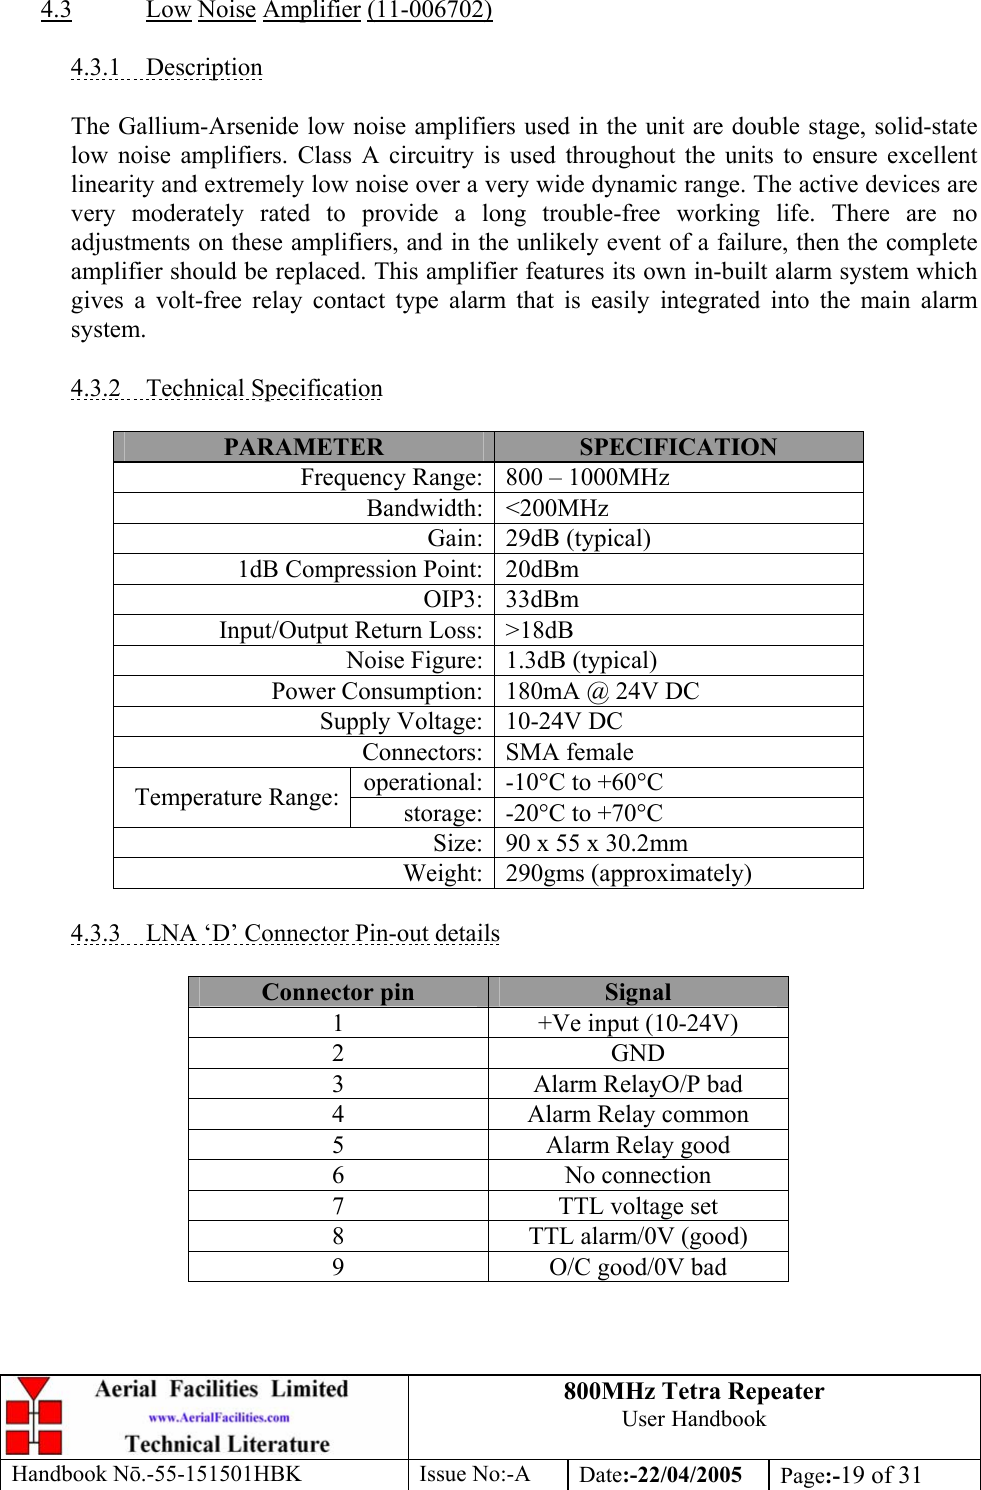 800MHz Tetra Repeater User Handbook Handbook Nō.-55-151501HBK Issue No:-A Date:-22/04/2005  Page:-19 of 31   4.3 Low Noise Amplifier (11-006702)  4.3.1 Description  The Gallium-Arsenide low noise amplifiers used in the unit are double stage, solid-state low noise amplifiers. Class A circuitry is used throughout the units to ensure excellent linearity and extremely low noise over a very wide dynamic range. The active devices are very moderately rated to provide a long trouble-free working life. There are no adjustments on these amplifiers, and in the unlikely event of a failure, then the complete amplifier should be replaced. This amplifier features its own in-built alarm system which gives a volt-free relay contact type alarm that is easily integrated into the main alarm system.  4.3.2 Technical Specification  PARAMETER  SPECIFICATION Frequency Range: 800 – 1000MHz Bandwidth: &lt;200MHz Gain: 29dB (typical) 1dB Compression Point: 20dBm OIP3: 33dBm Input/Output Return Loss: &gt;18dB Noise Figure: 1.3dB (typical) Power Consumption: 180mA @ 24V DC Supply Voltage: 10-24V DC Connectors: SMA female operational: -10°C to +60°C Temperature Range:  storage: -20°C to +70°C Size: 90 x 55 x 30.2mm Weight: 290gms (approximately)  4.3.3  LNA ‘D’ Connector Pin-out details  Connector pin  Signal 1  +Ve input (10-24V) 2 GND 3  Alarm RelayO/P bad 4  Alarm Relay common 5  Alarm Relay good 6 No connection 7  TTL voltage set 8  TTL alarm/0V (good) 9  O/C good/0V bad  